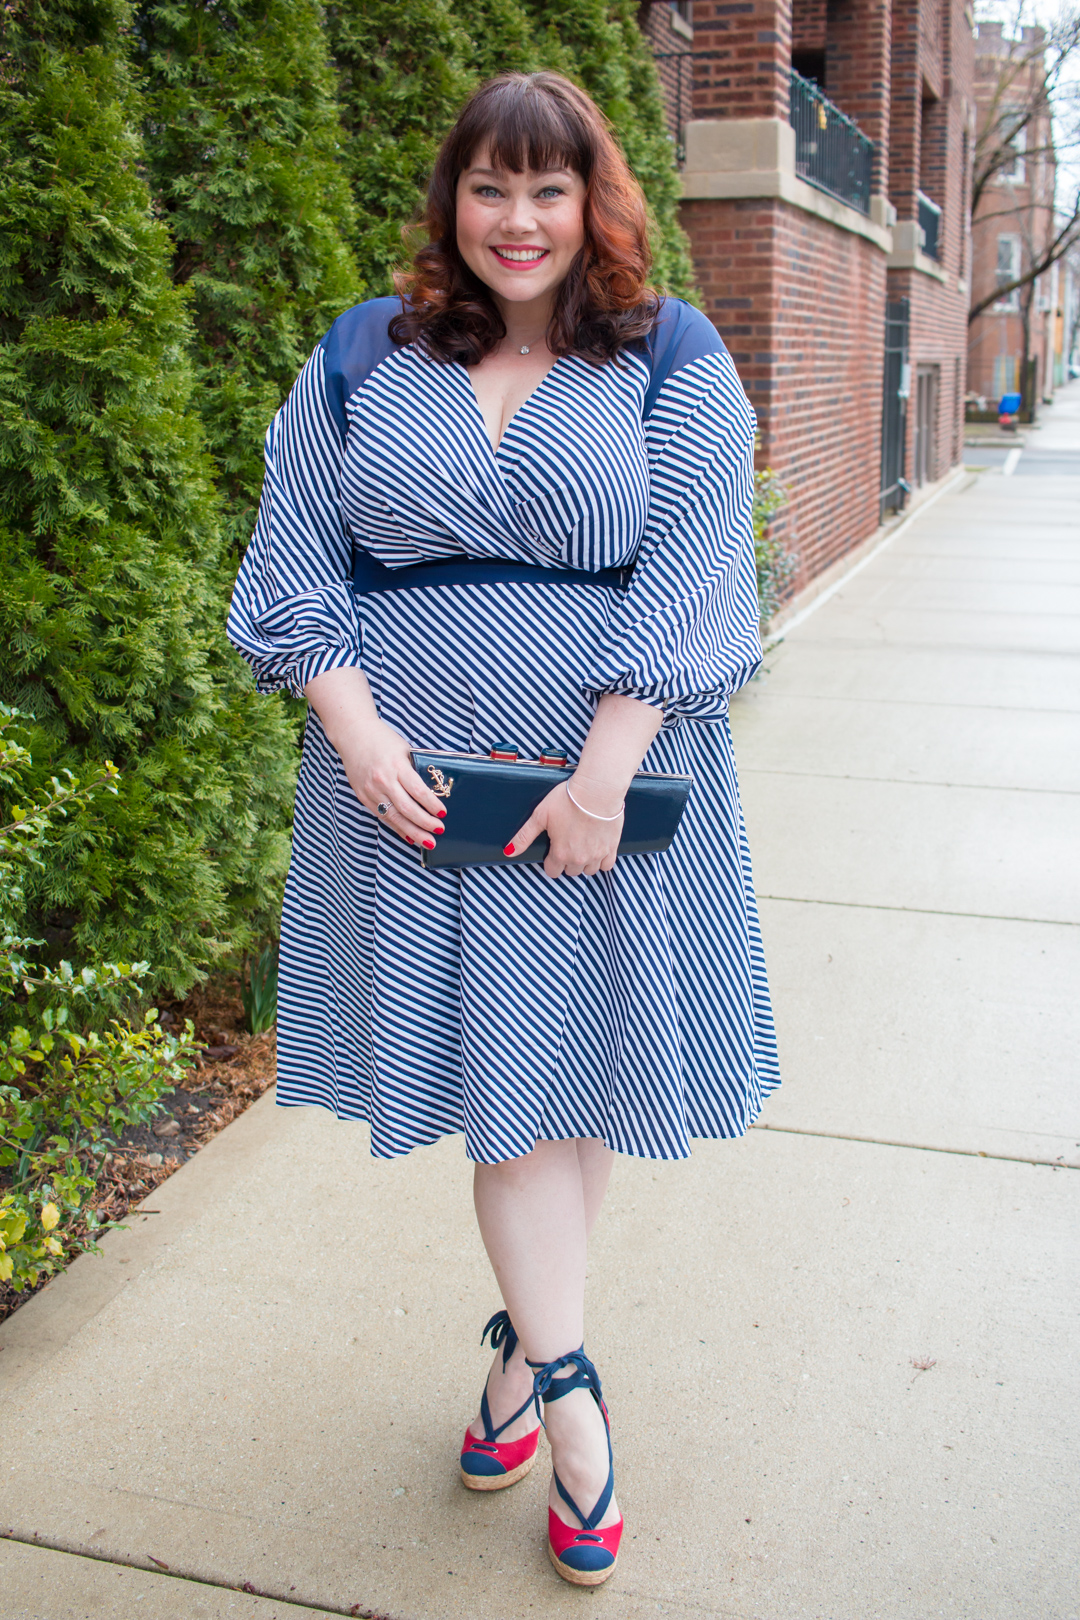 Plus Size Blogger in Striped Wrap Dress by Prabal Gurung by Lane Bryant